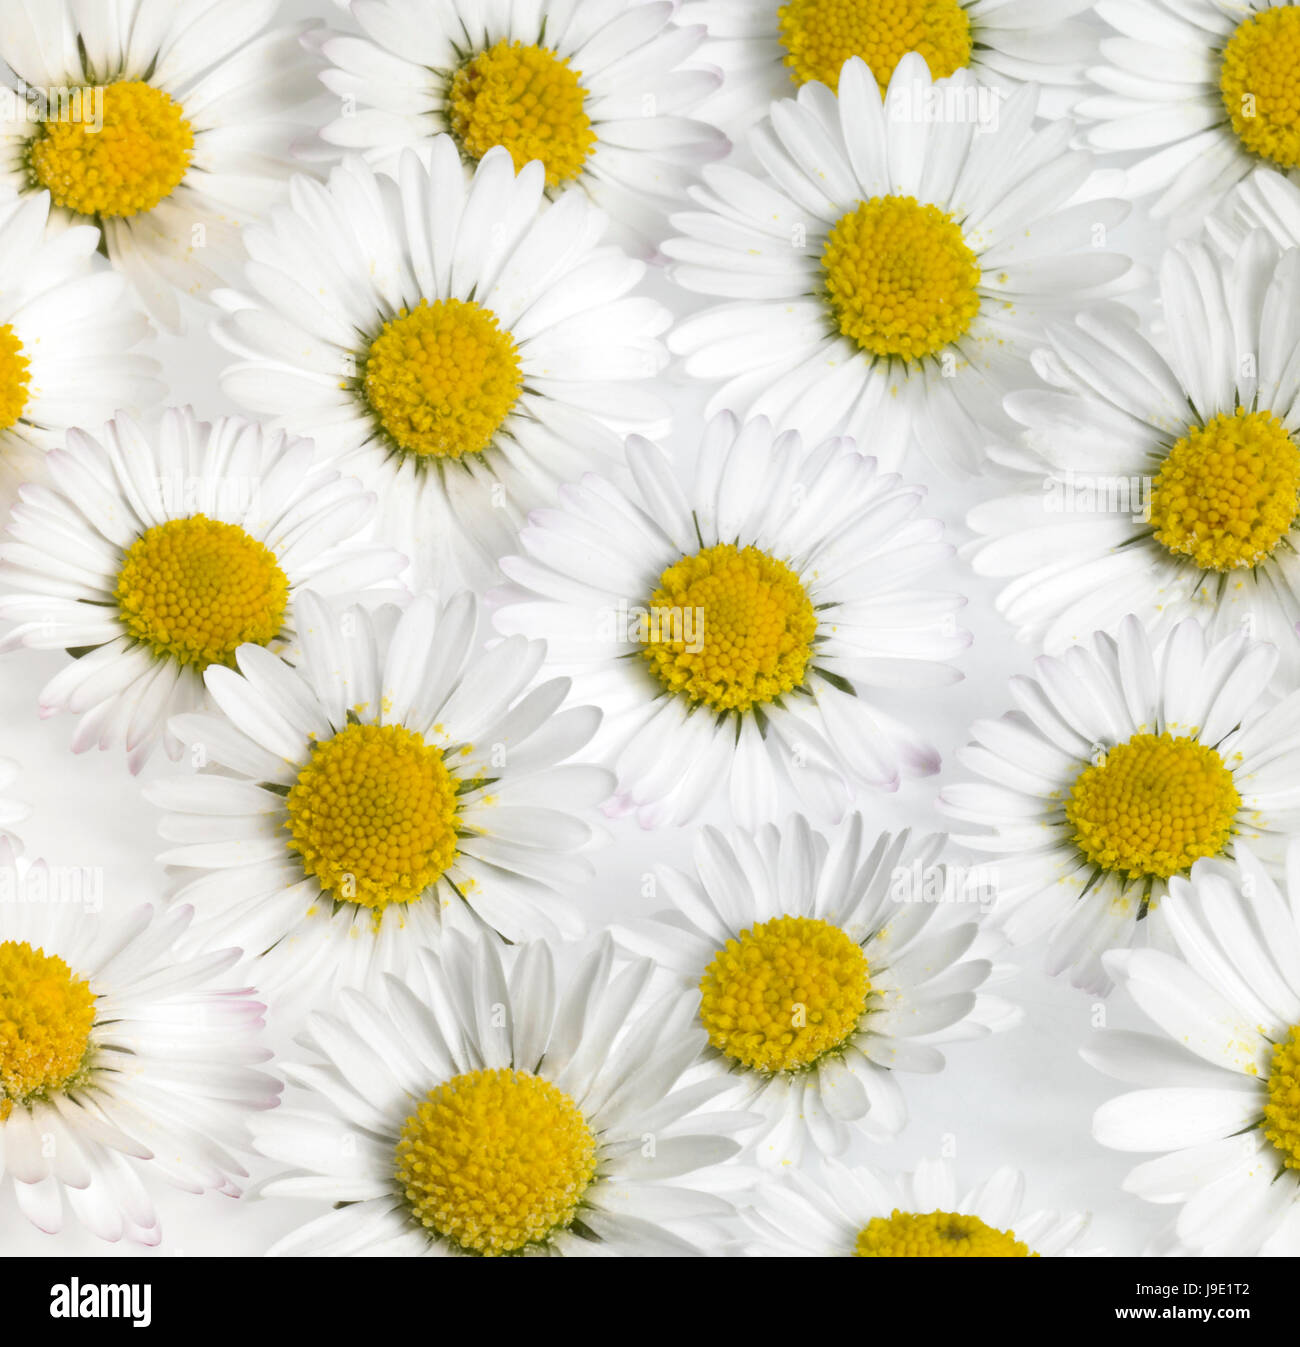 floral daisy flower background Stock Photo